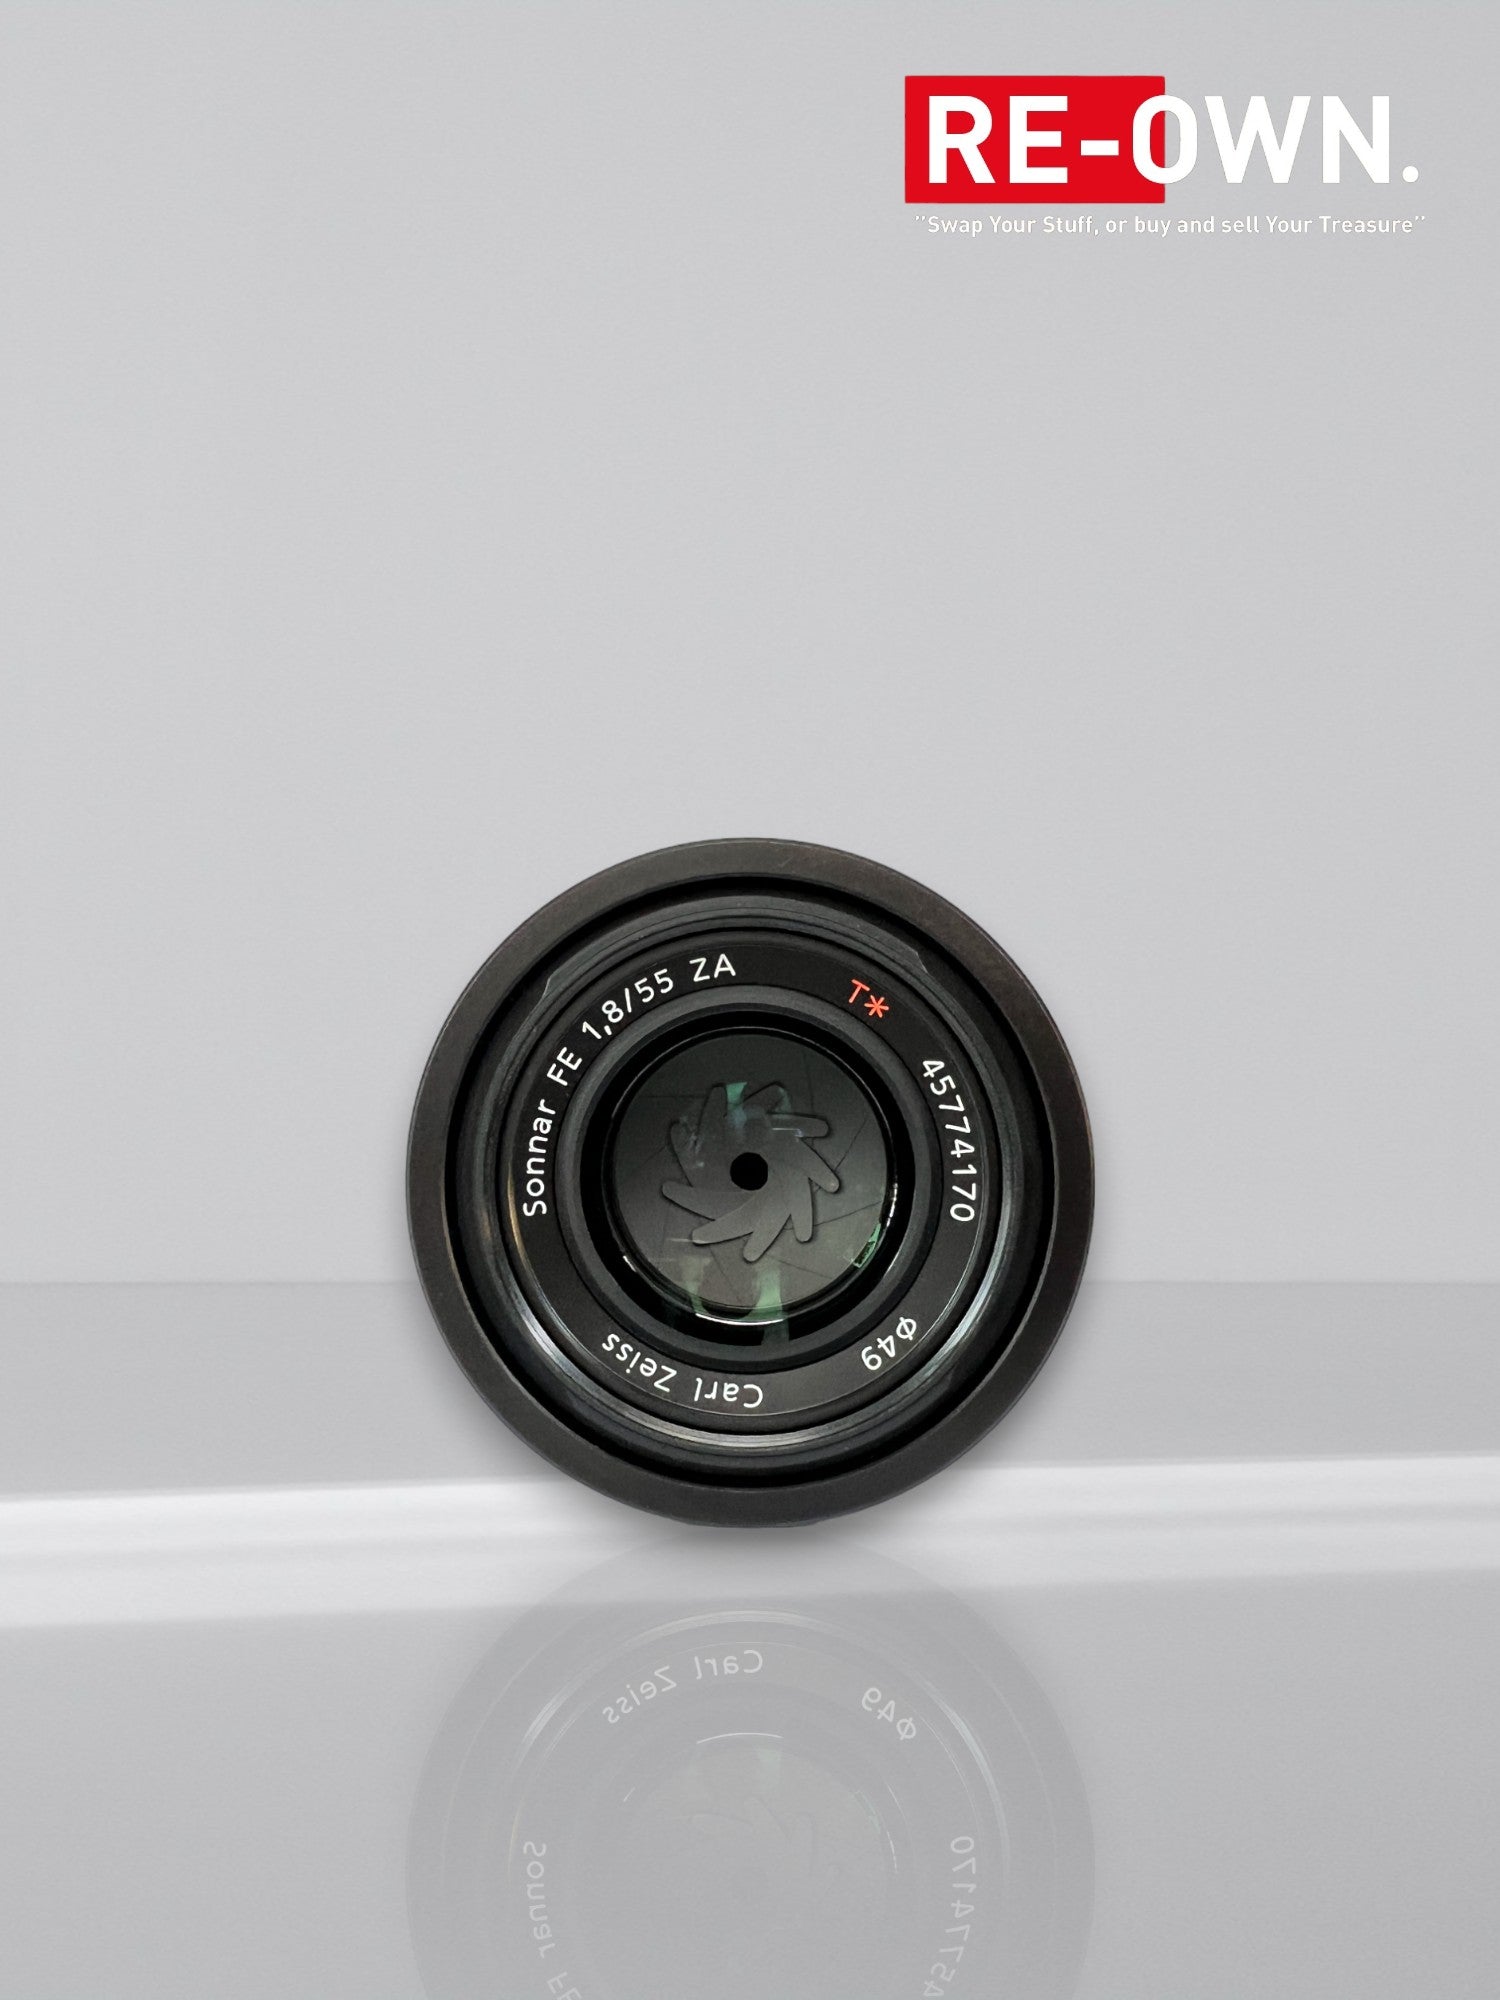 Sony FE 55mm F/1.8 ZEISS Sonnar T